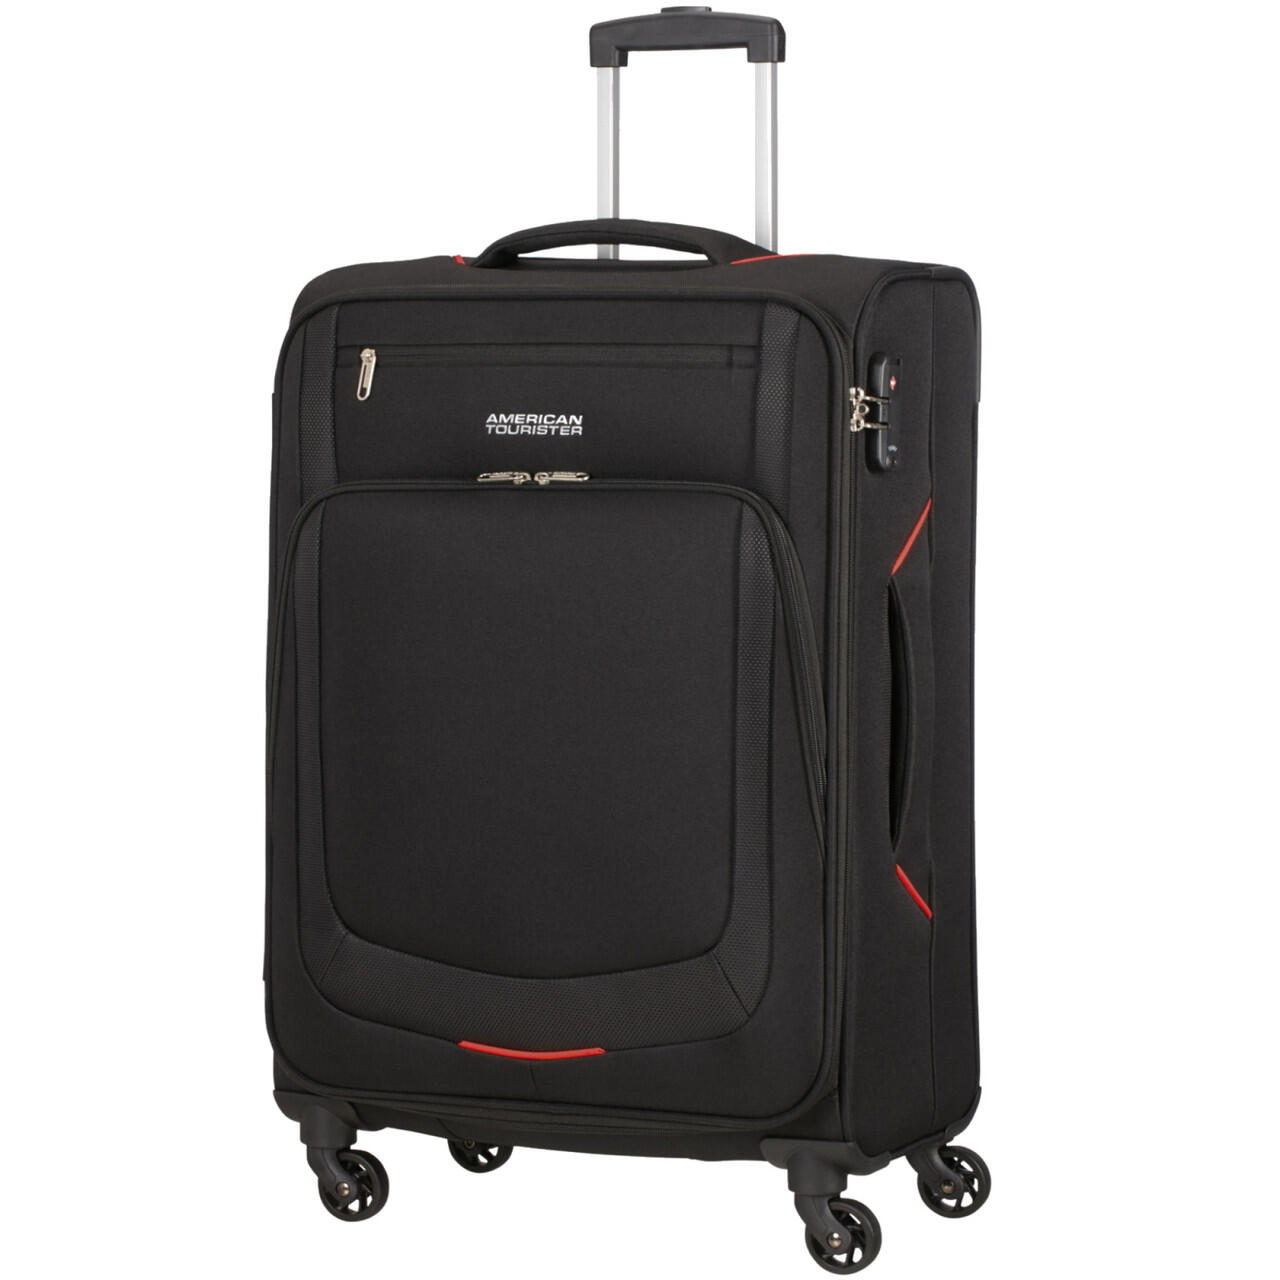 AMERICAN TOURISTER Summer Session Large Suitcase - 80cm - Black/Red